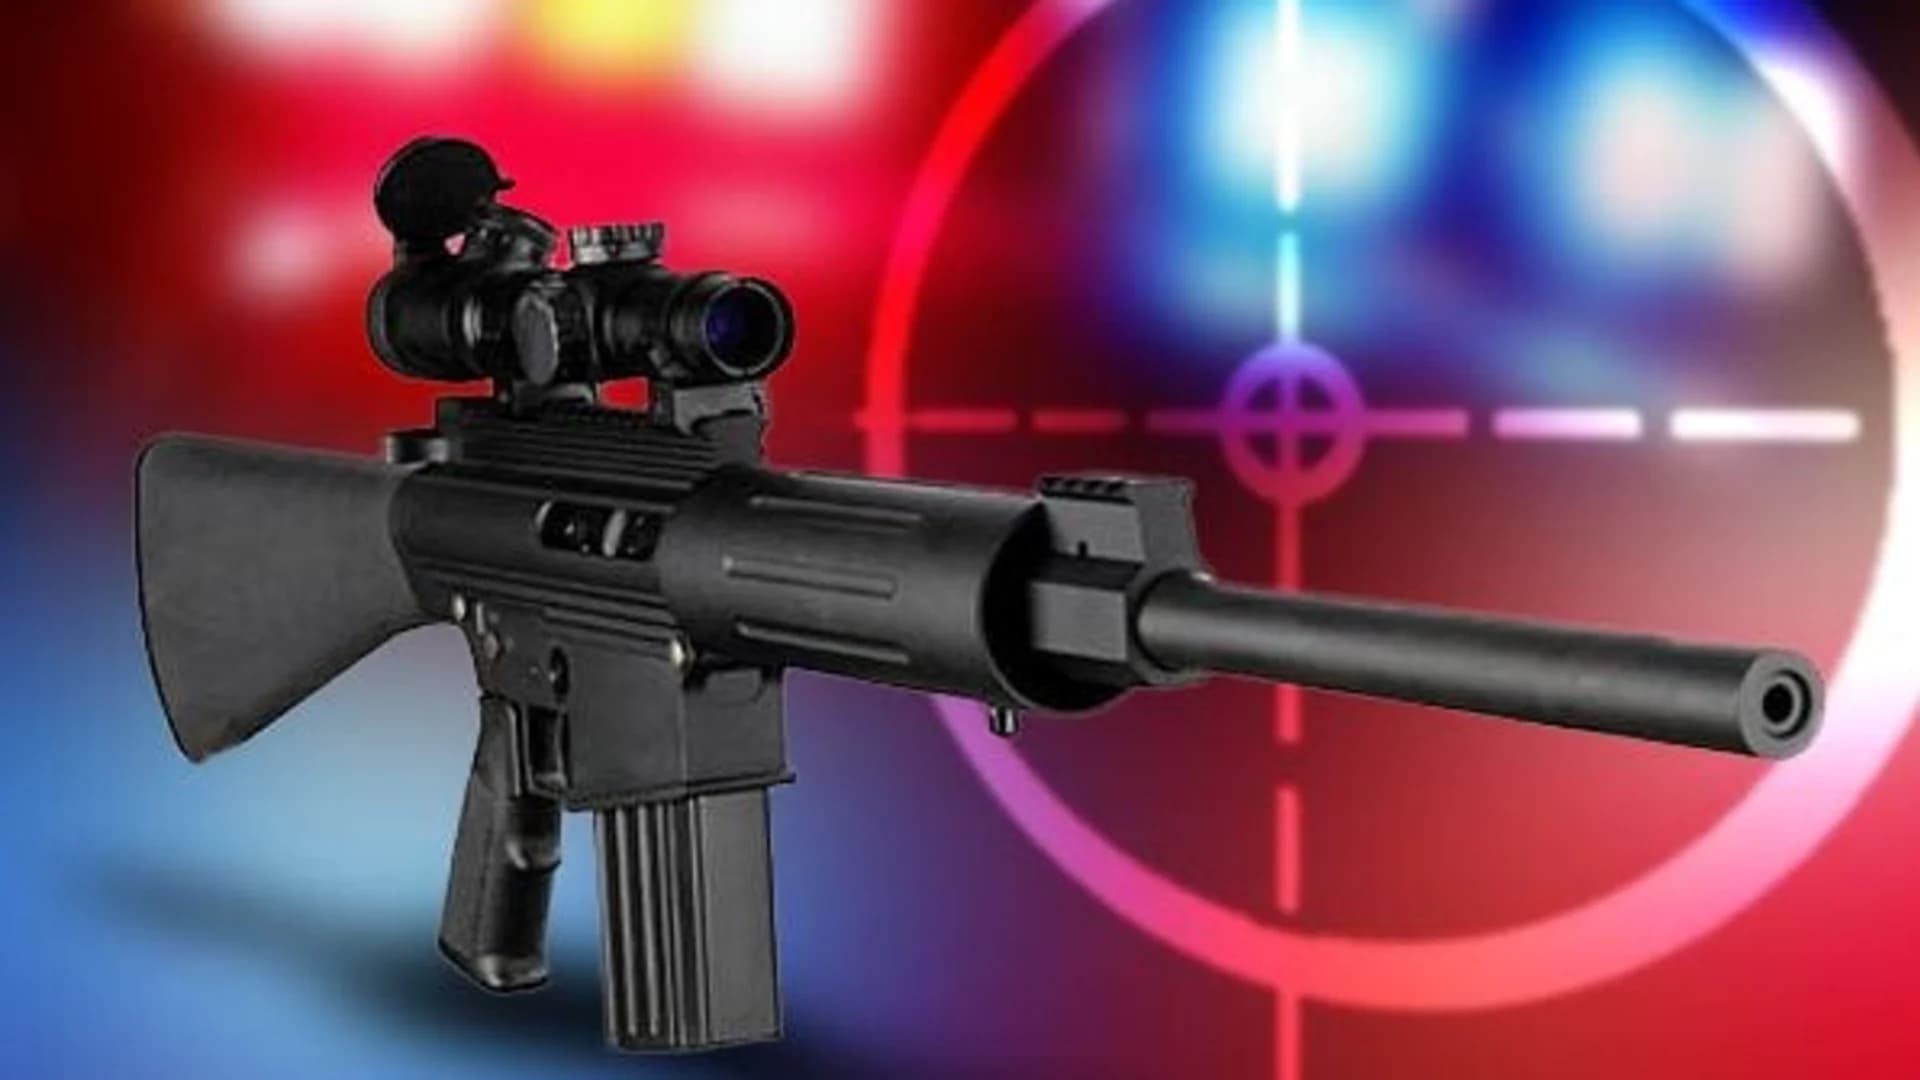 Bergenfield police union cancels plan to raffle off semi-automatic rifle